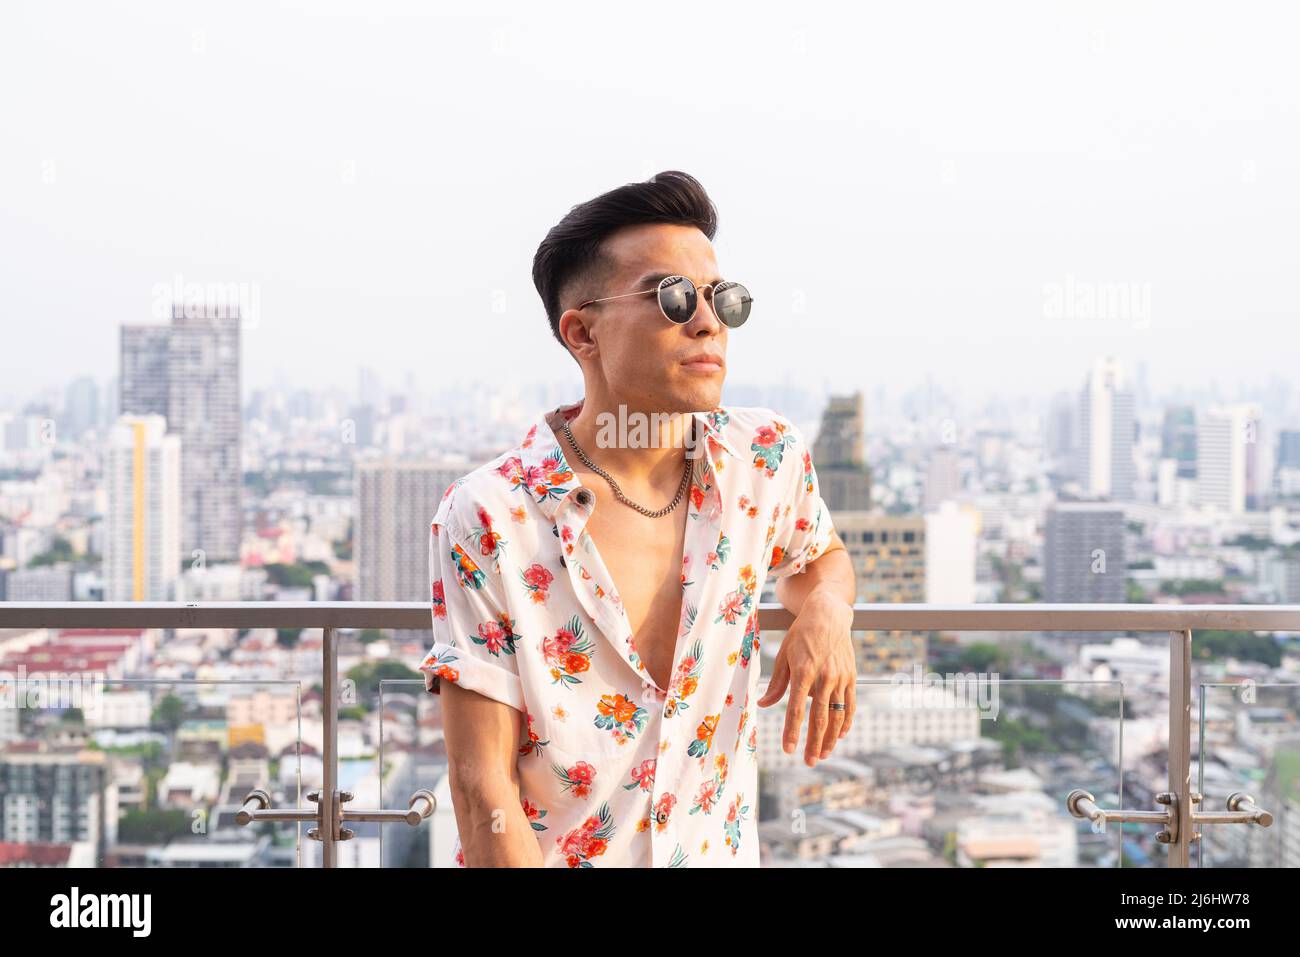 Portrait of handsome young cool stylish man during summer Stock Photo